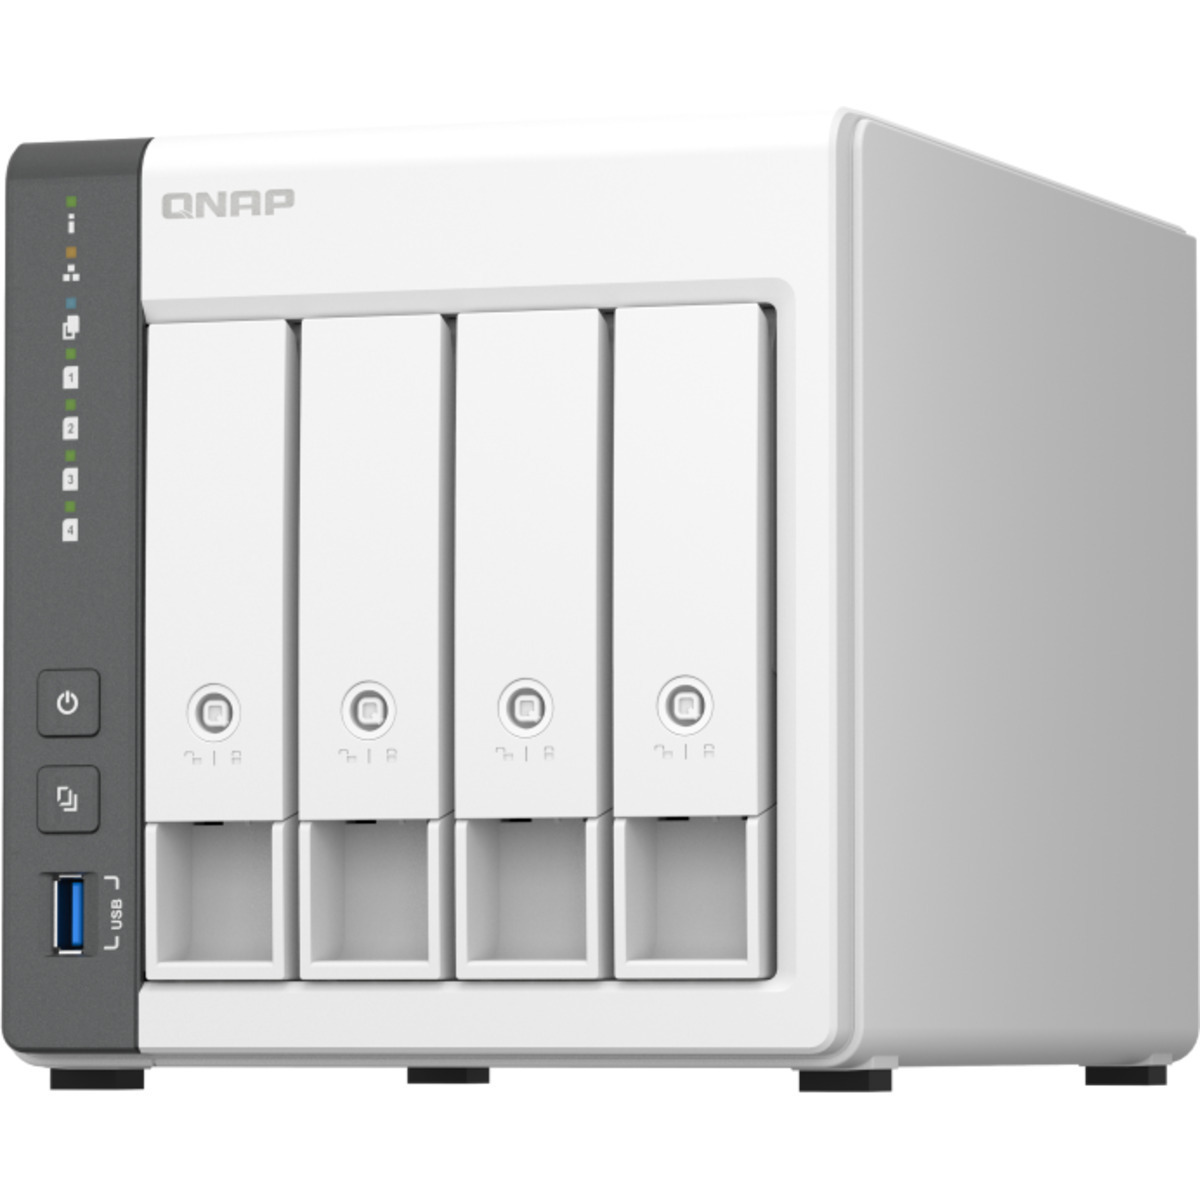 QNAP TS-433 1.5tb 4-Bay Desktop Personal / Basic Home / Small Office NAS - Network Attached Storage Device 3x500gb Sandisk Ultra 3D SDSSDH3-500G 2.5 560/520MB/s SATA 6Gb/s SSD CONSUMER Class Drives Installed - Burn-In Tested TS-433